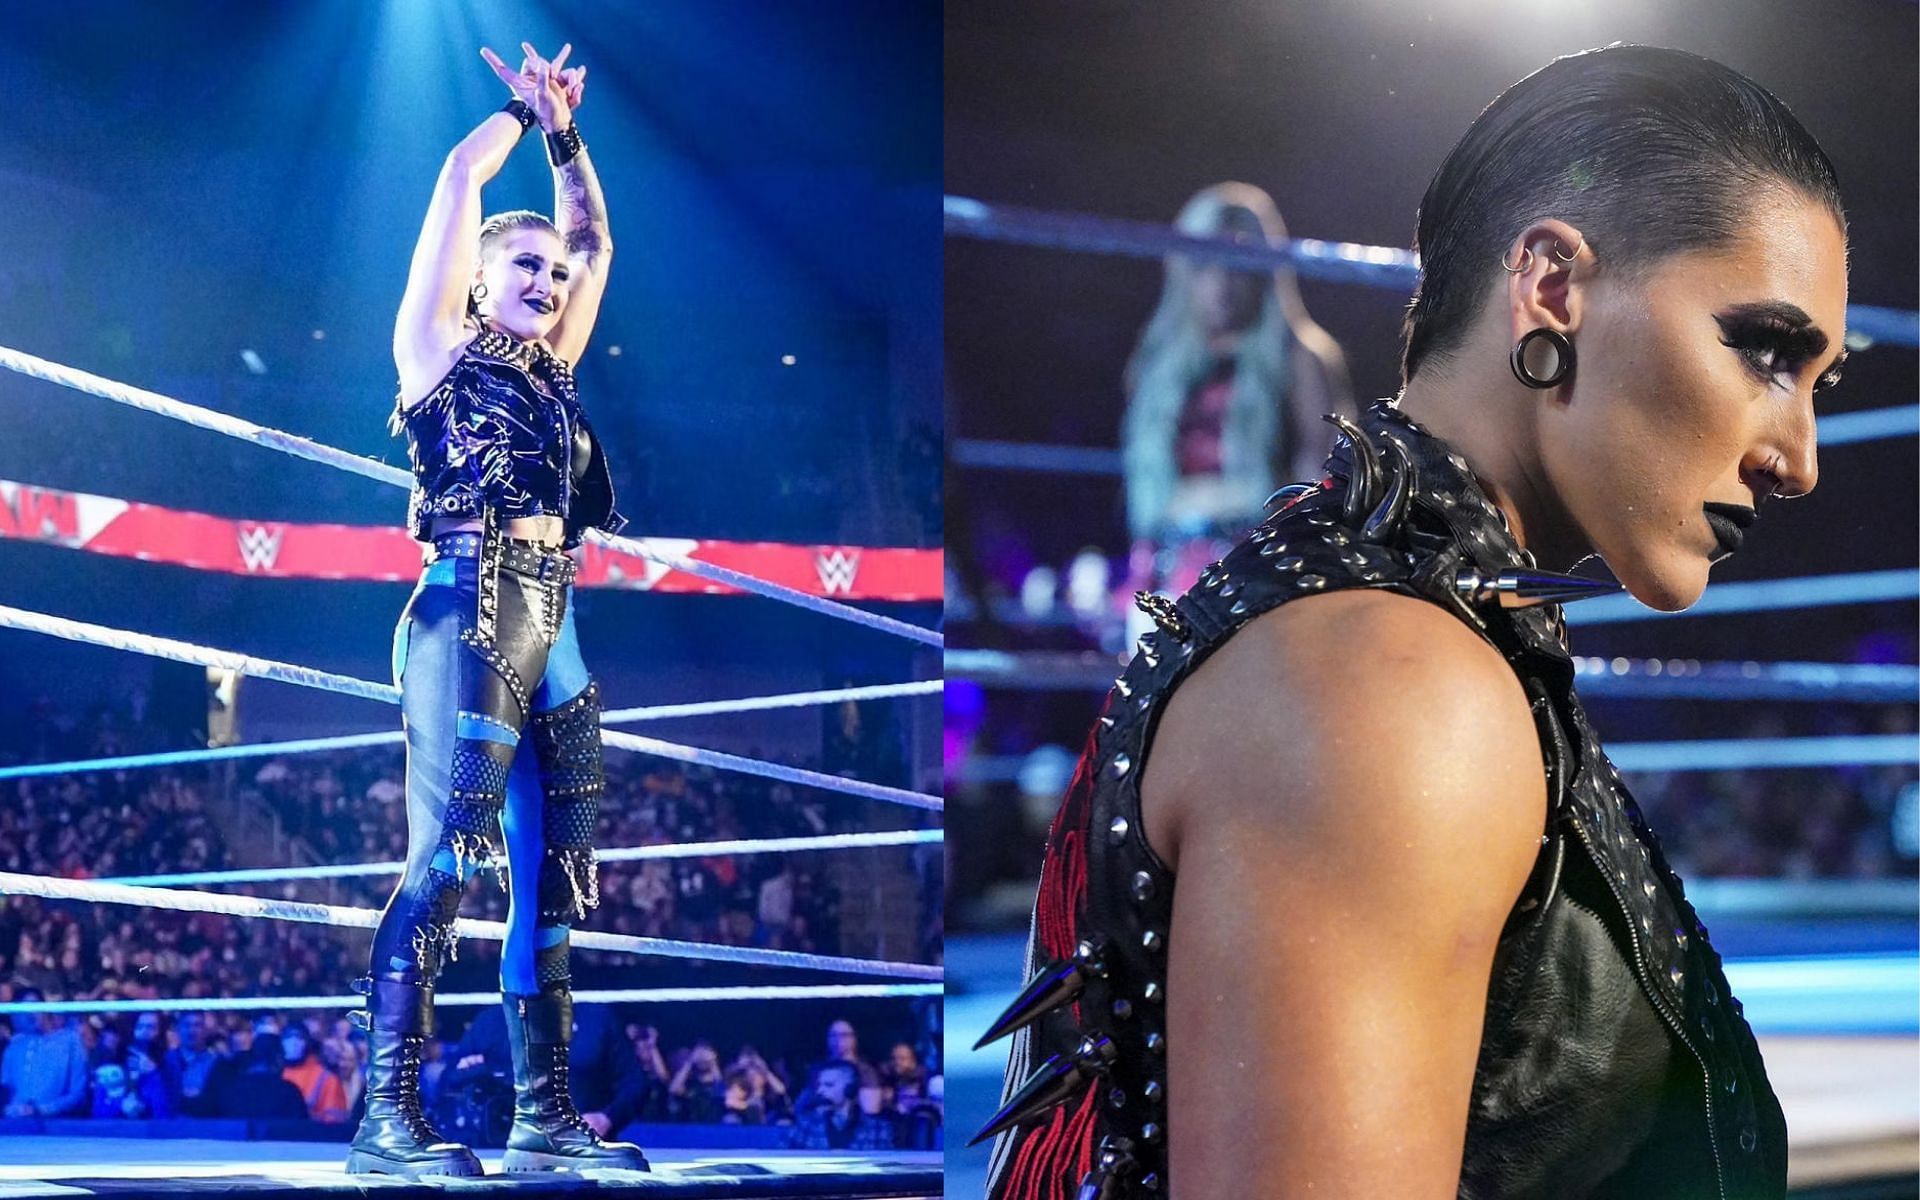 Rhea Ripley is known for her gothic-rocker look citing all-black attire and lipstick